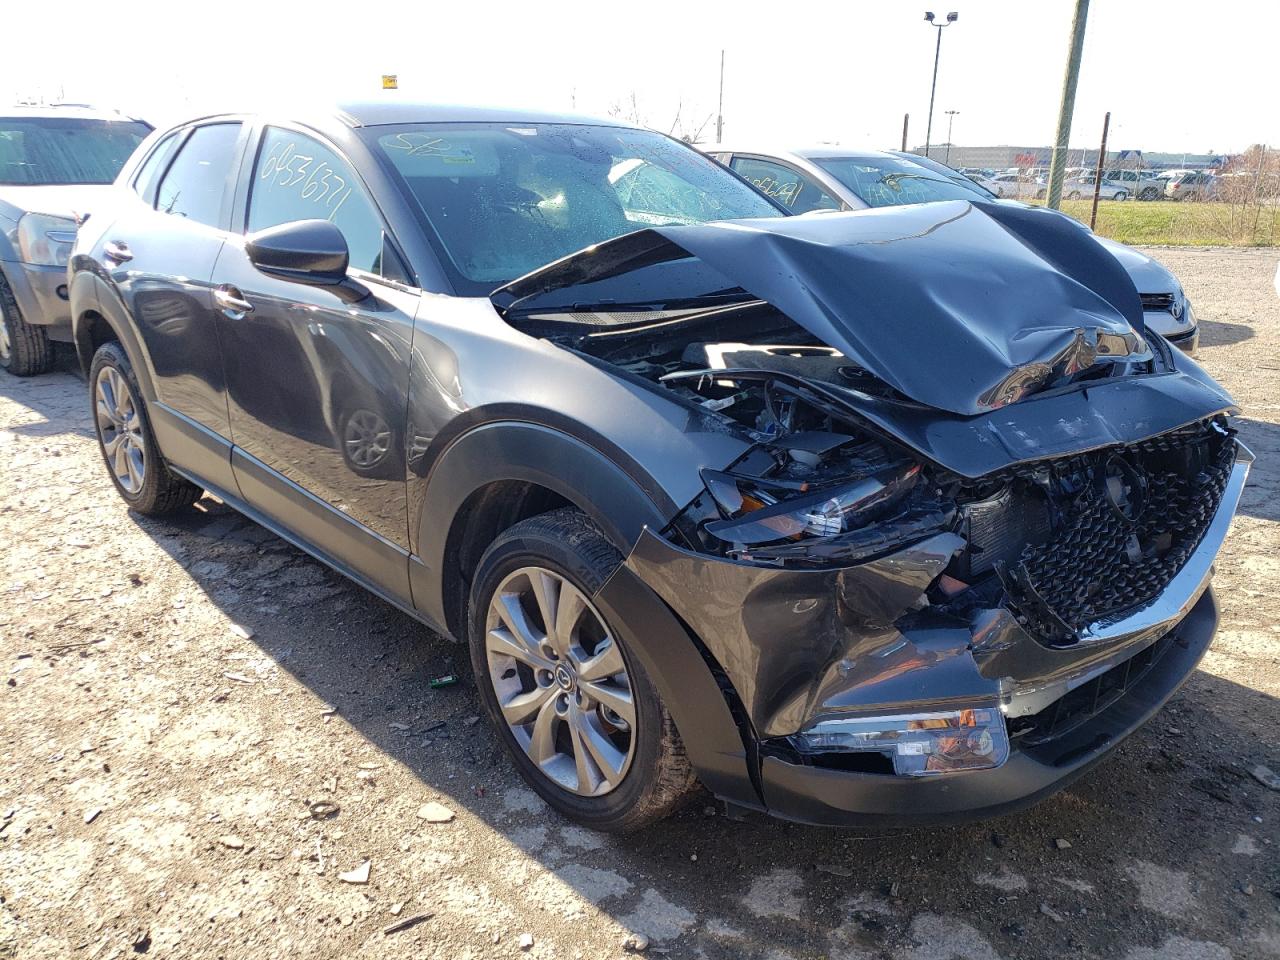 vin: 3MVDMABL1MM252067 3MVDMABL1MM252067 2021 mazda cx-30 2500 for Sale in 46254 2452, In - Indianapolis, Indianapolis, USA